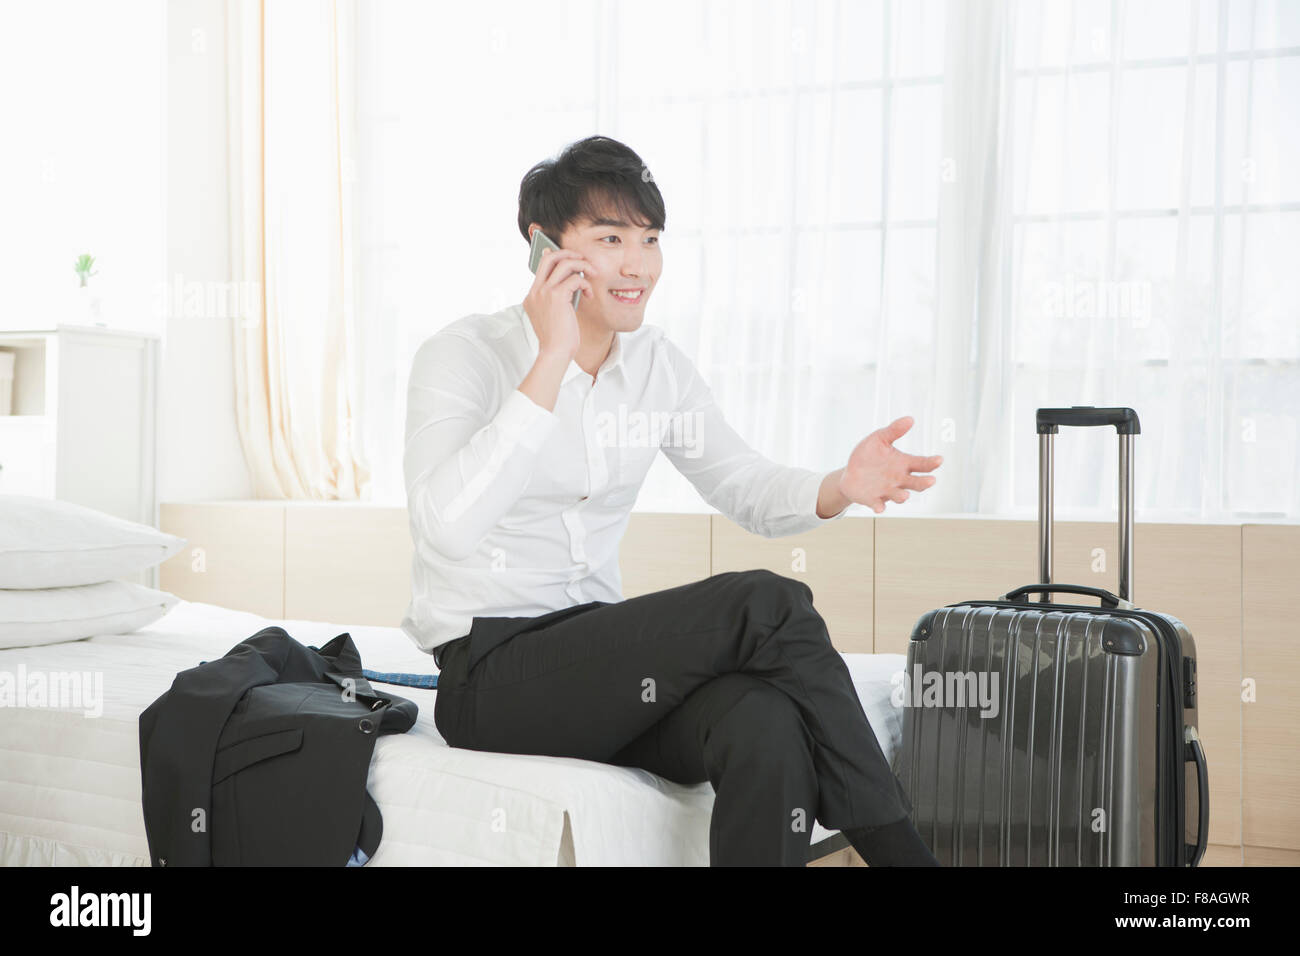 Businessman talking on the phone with hand gestures and legs crossed on bed Stock Photo